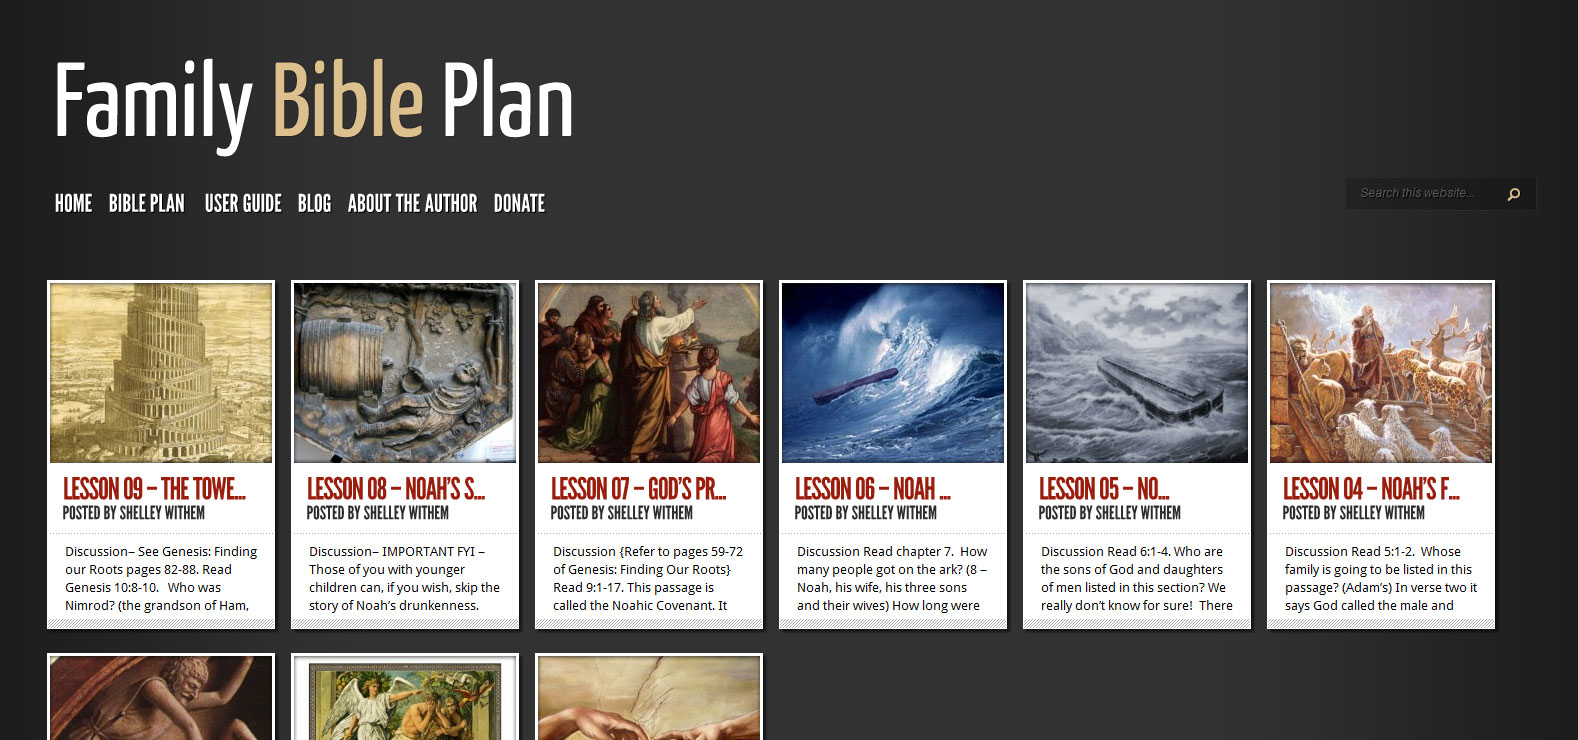 Side Project: The Family Bible Plan